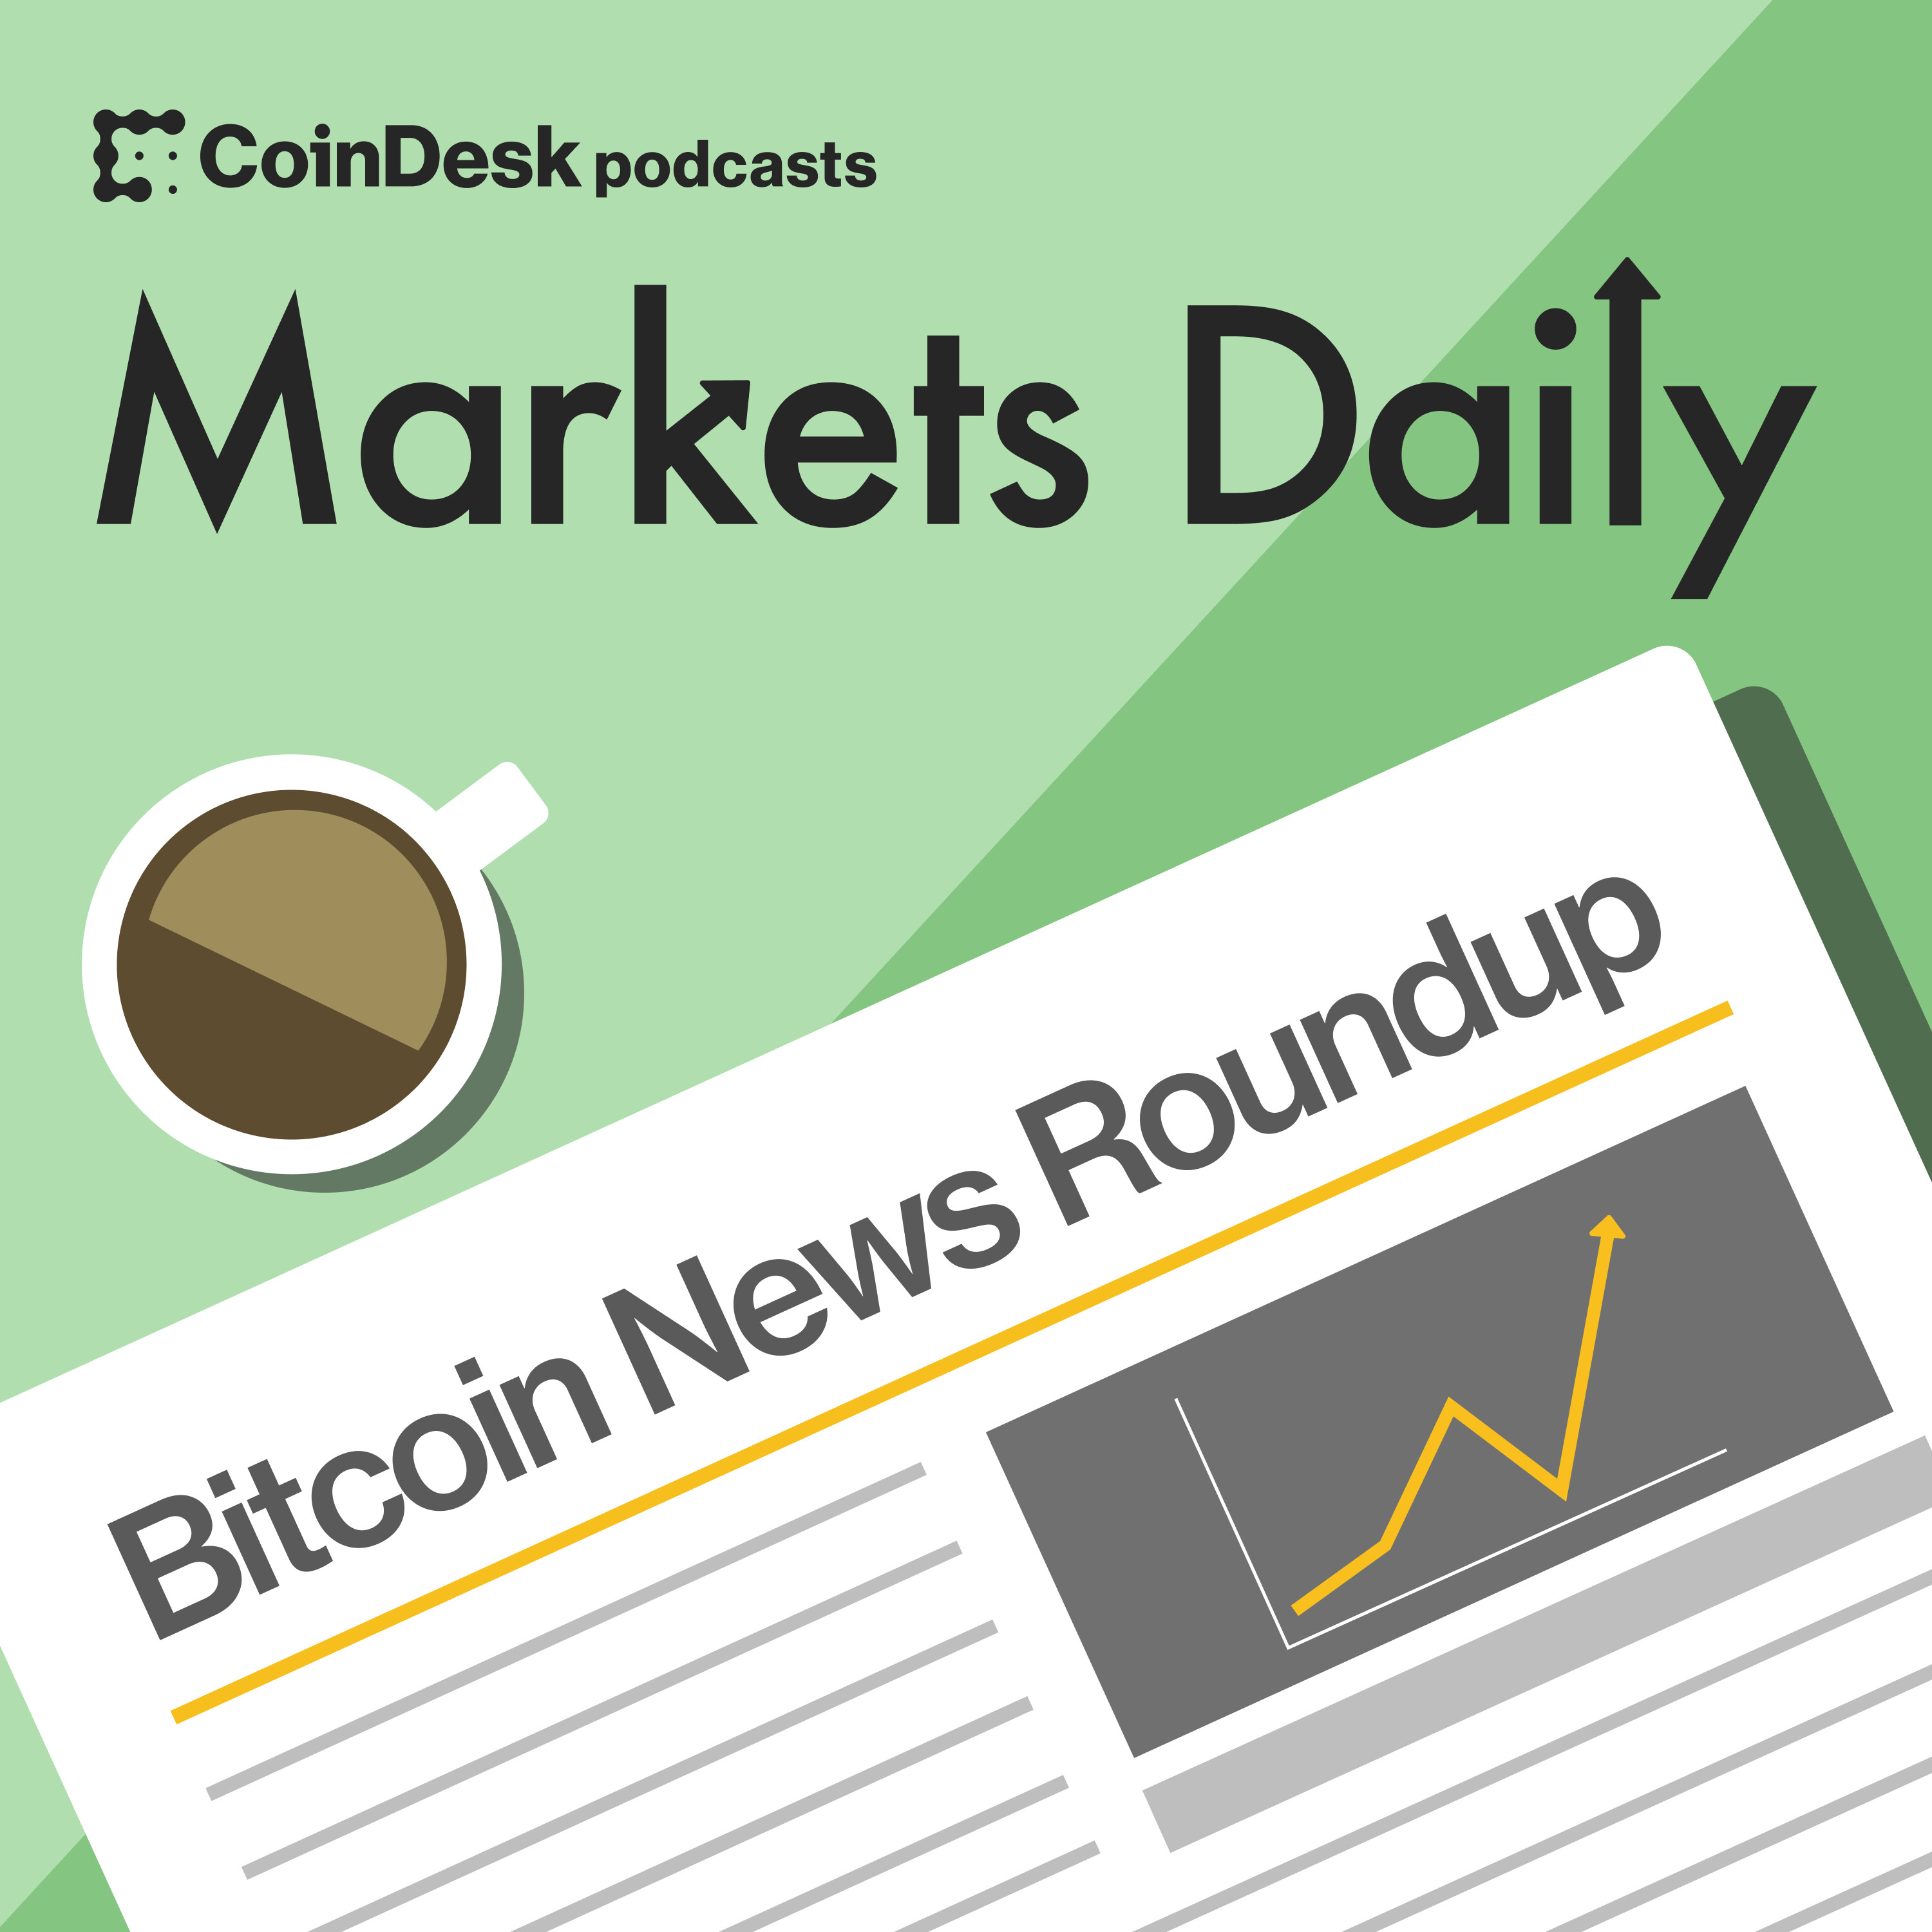 MARKETS DAILY: Crypto Update | Positive Regulatory Developments for Crypto